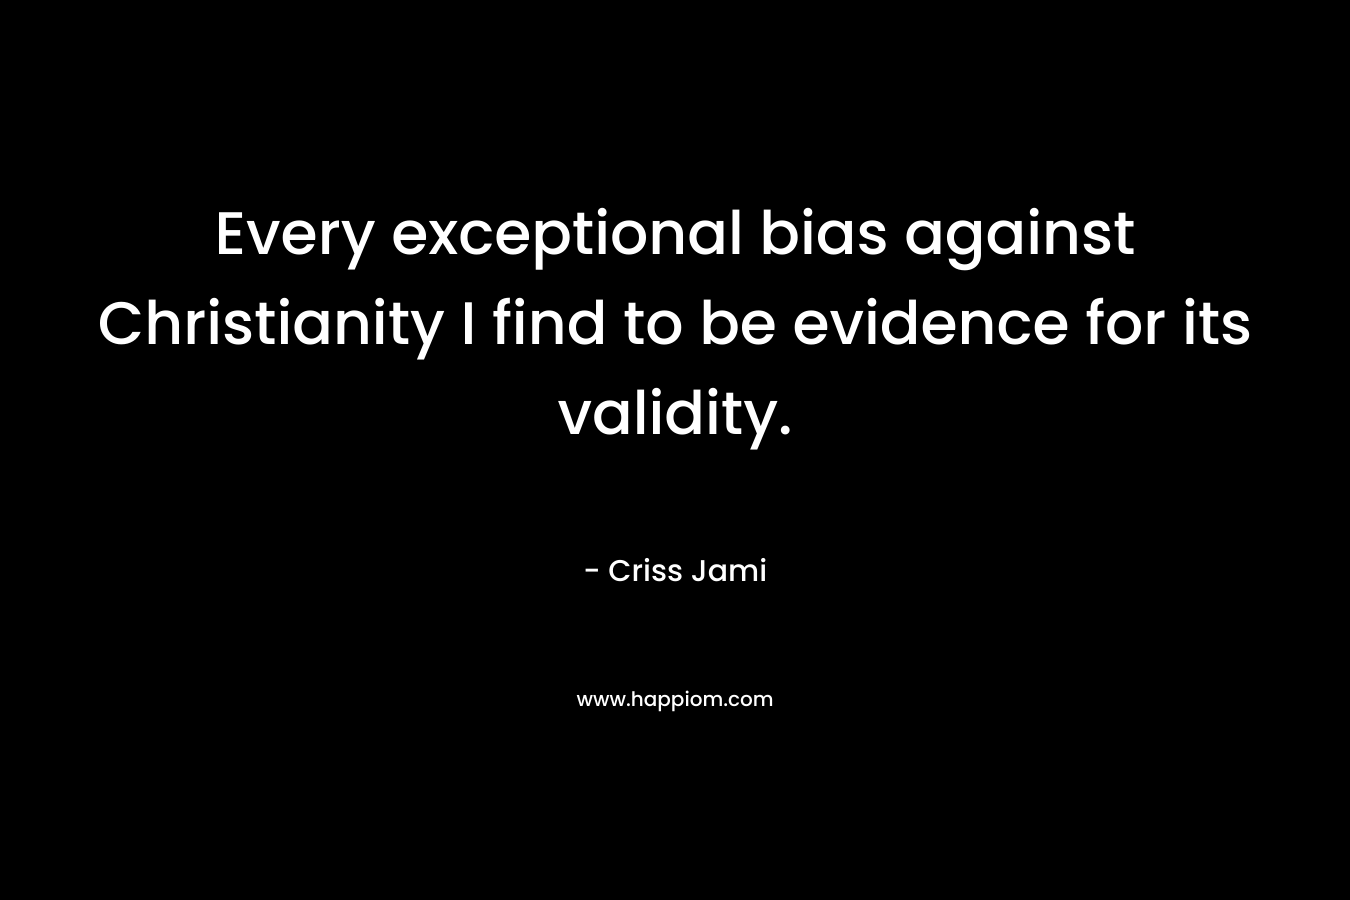 Every exceptional bias against Christianity I find to be evidence for its validity. – Criss Jami